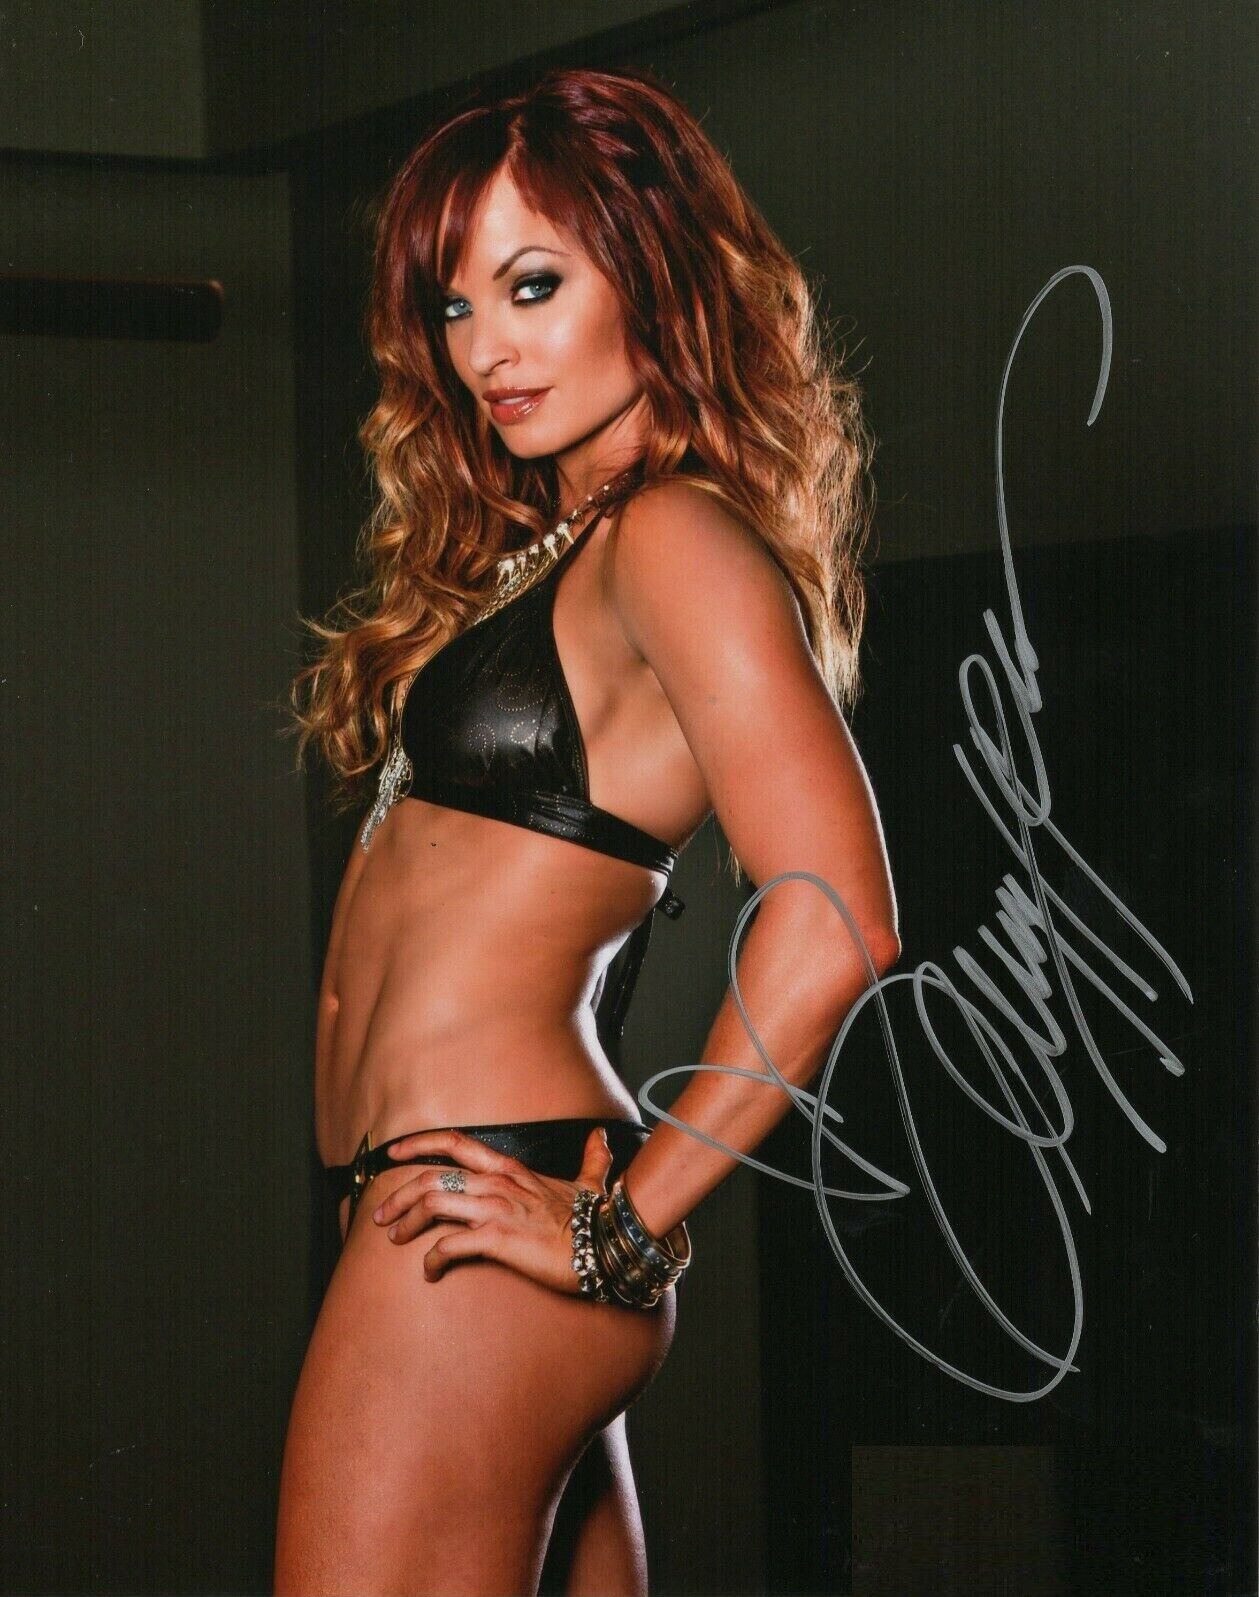 Christy Hemme ( WWF WWE ) Autographed Signed 8x10 Photo Poster painting REPRINT